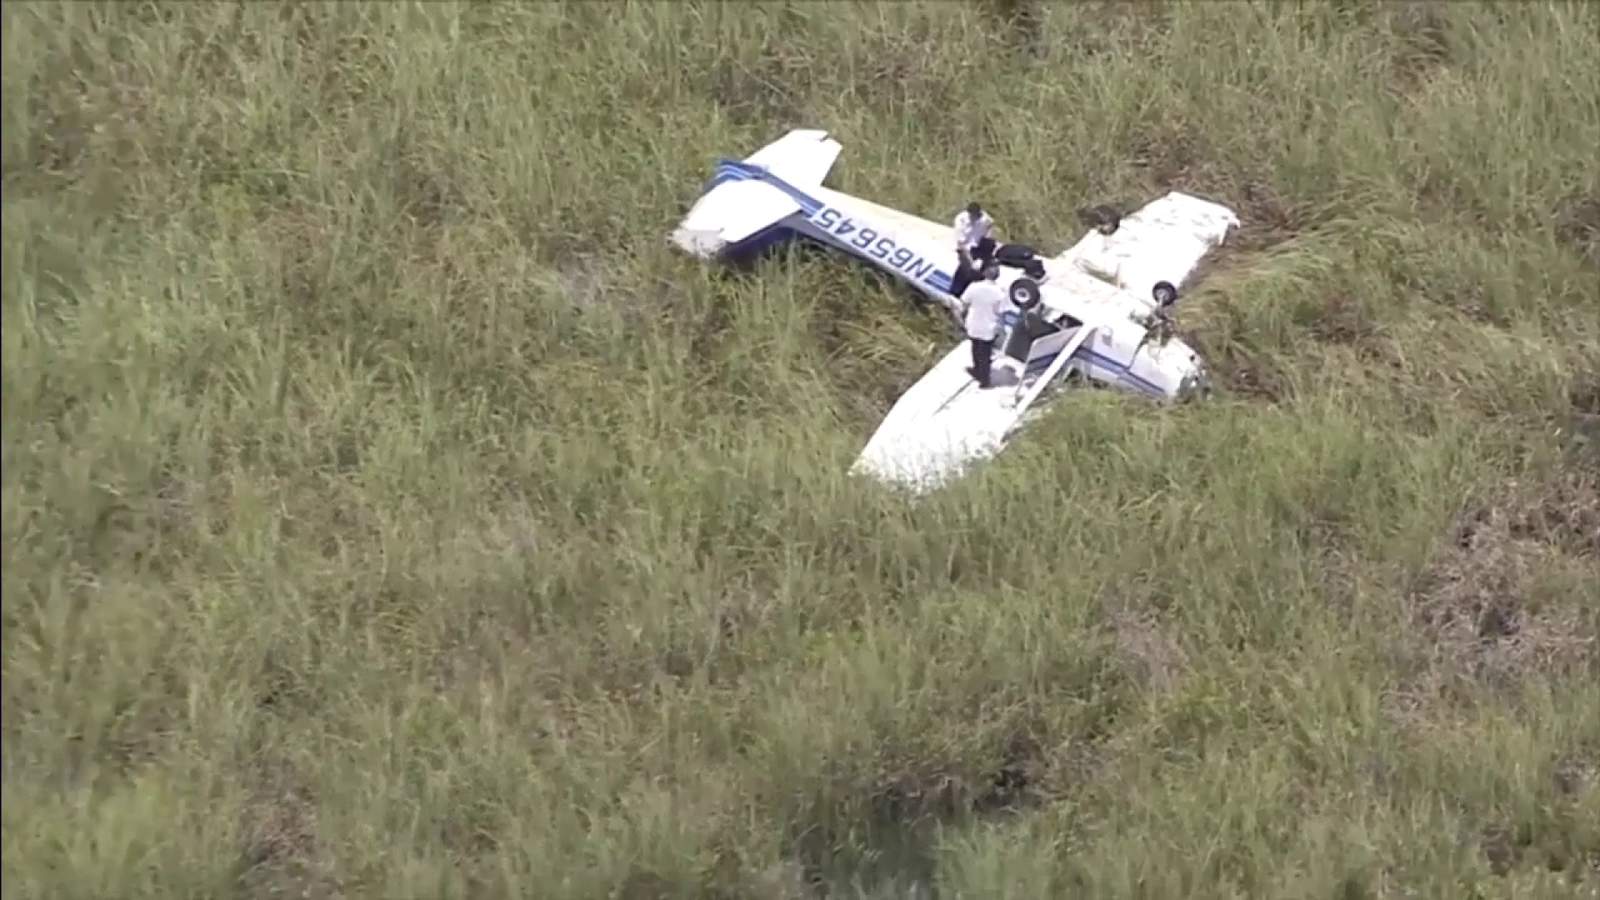 After fatal crash, Broward mayor aims to address decades of concerns about North Perry Airport safety